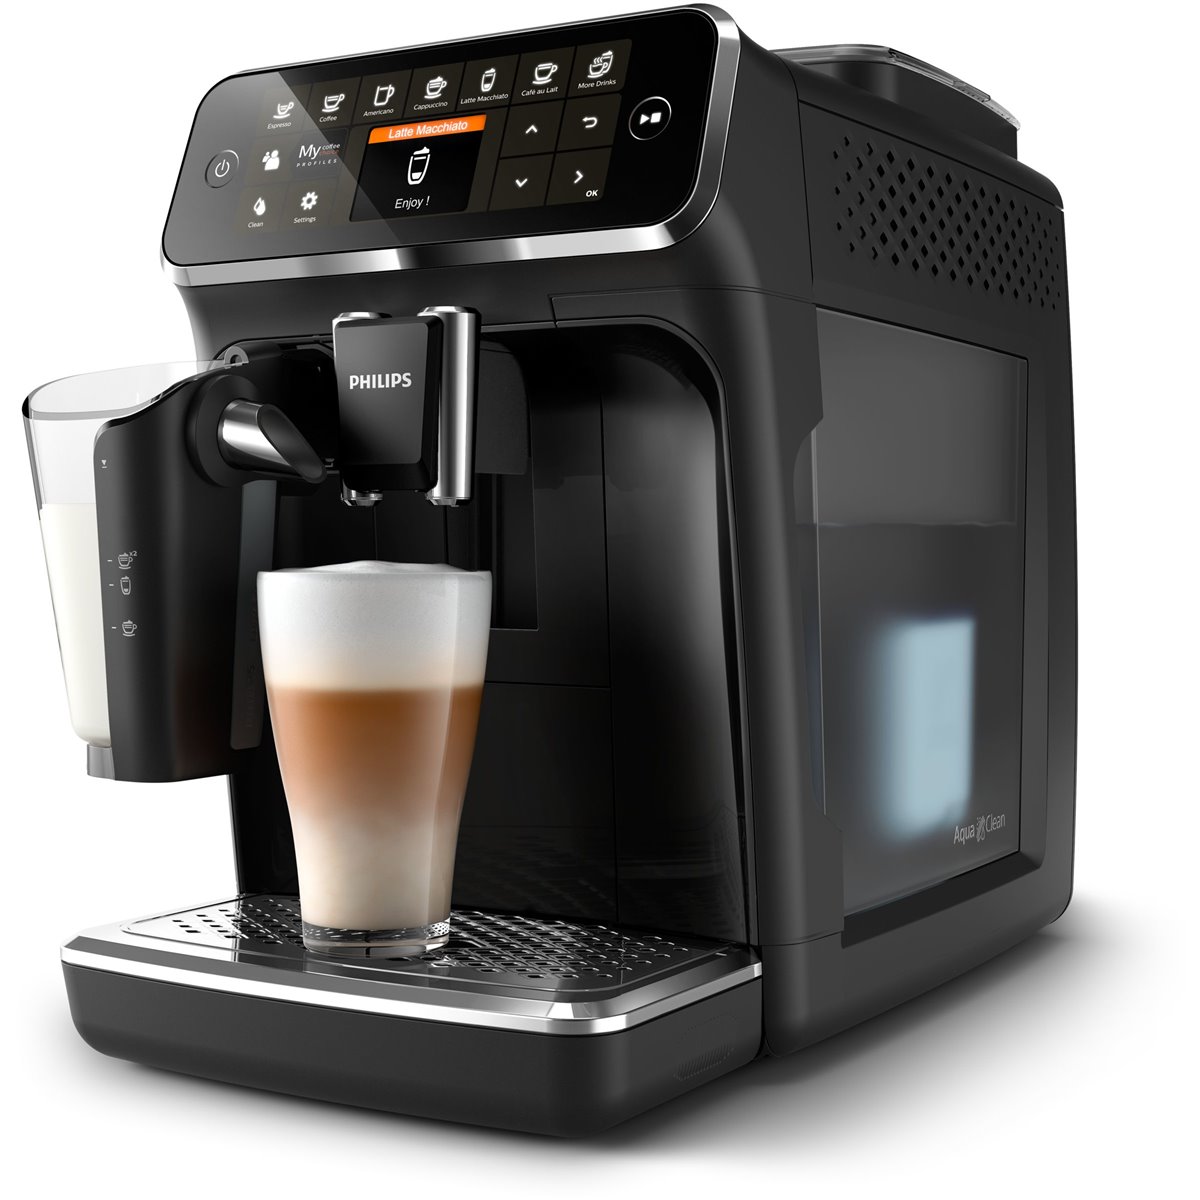 Philips EP4341-50 coffee maker 1.8 L